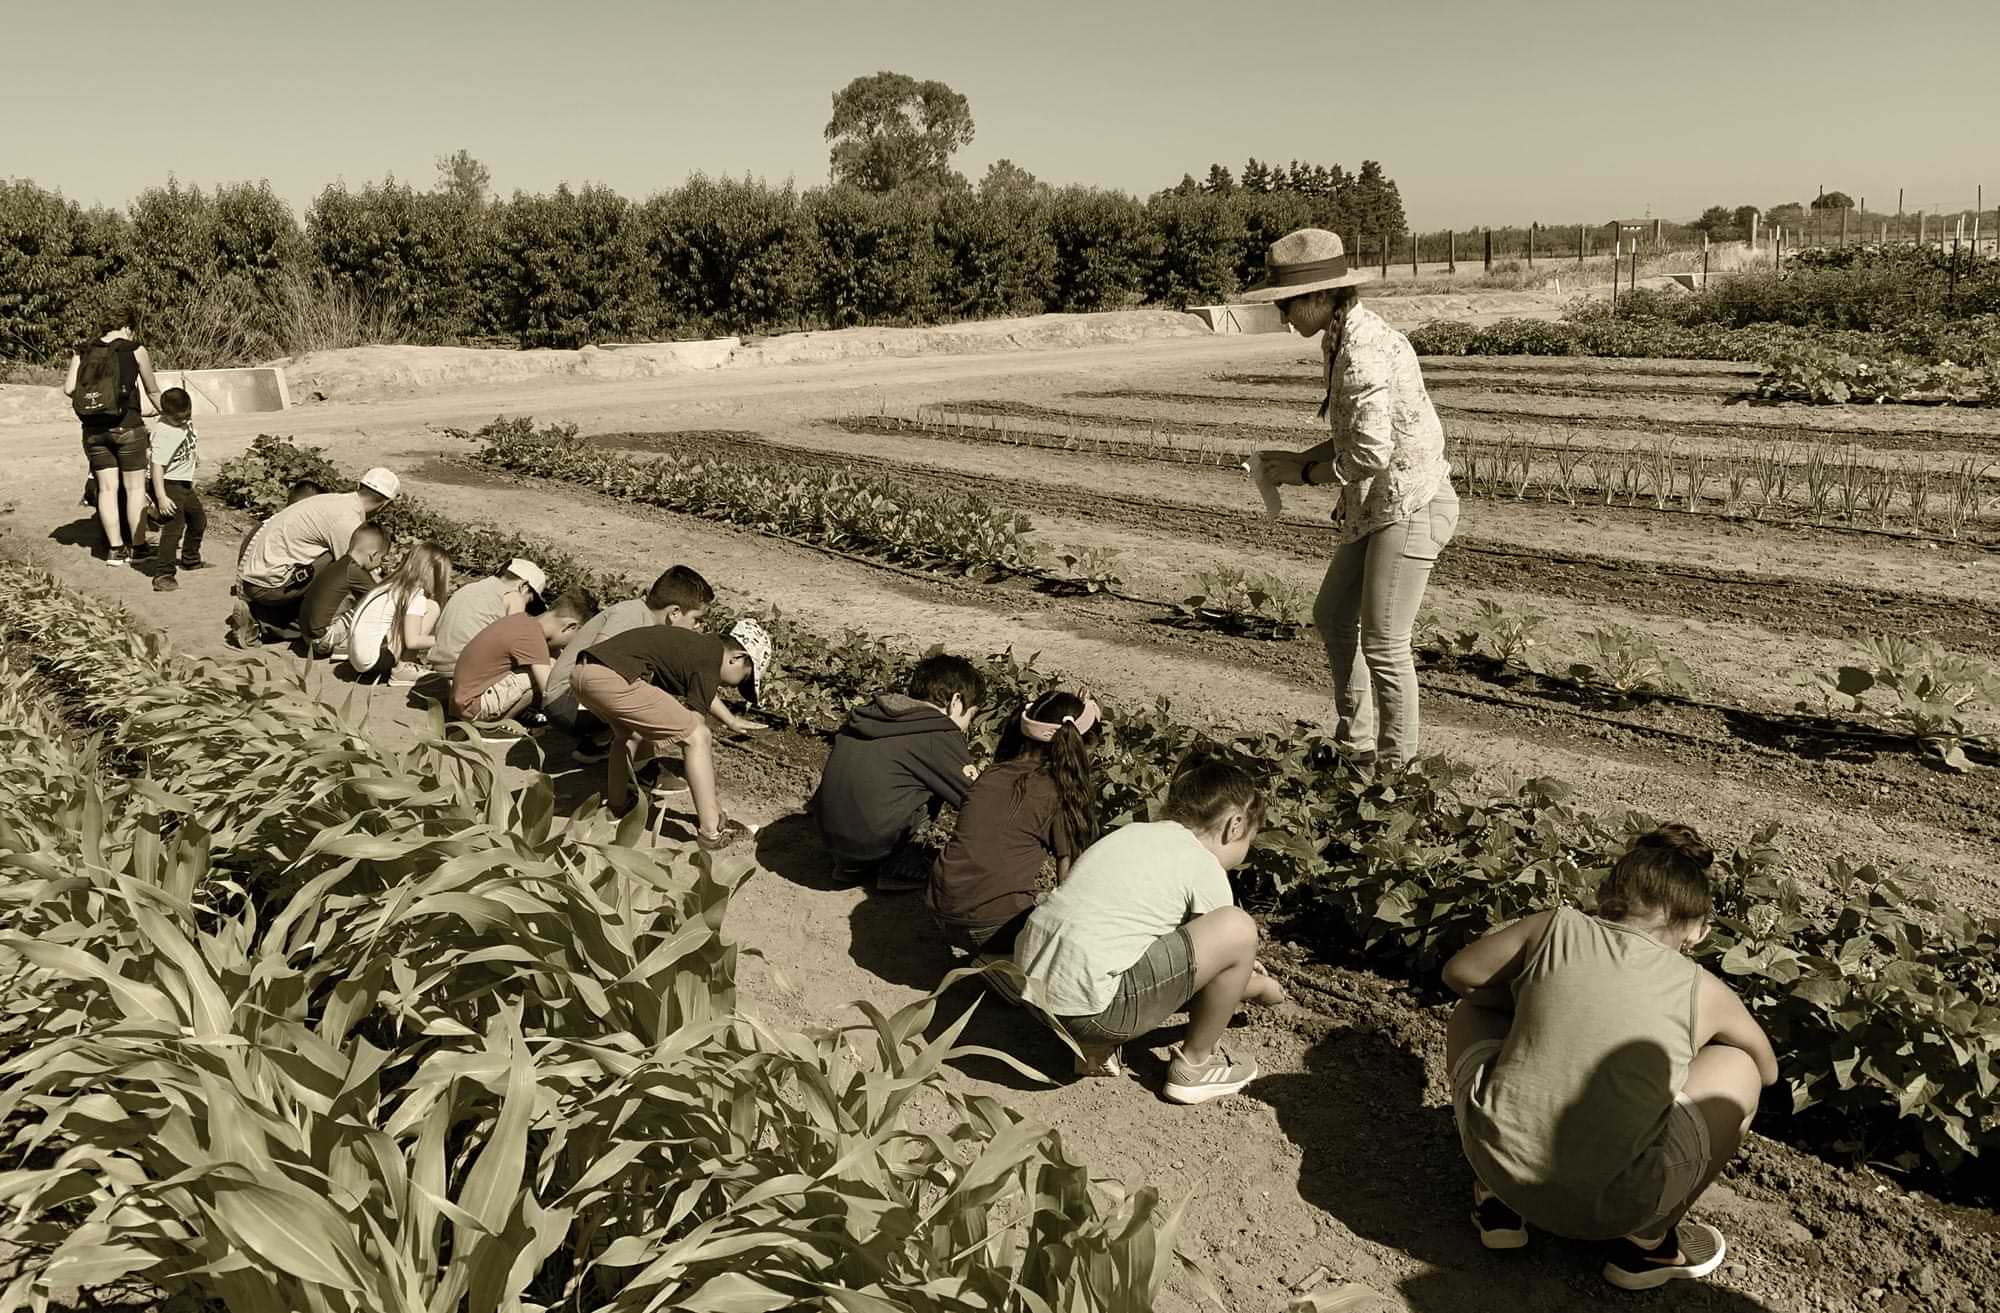 elementary aged students crouch to work on a crop row, under the supervision of two adults